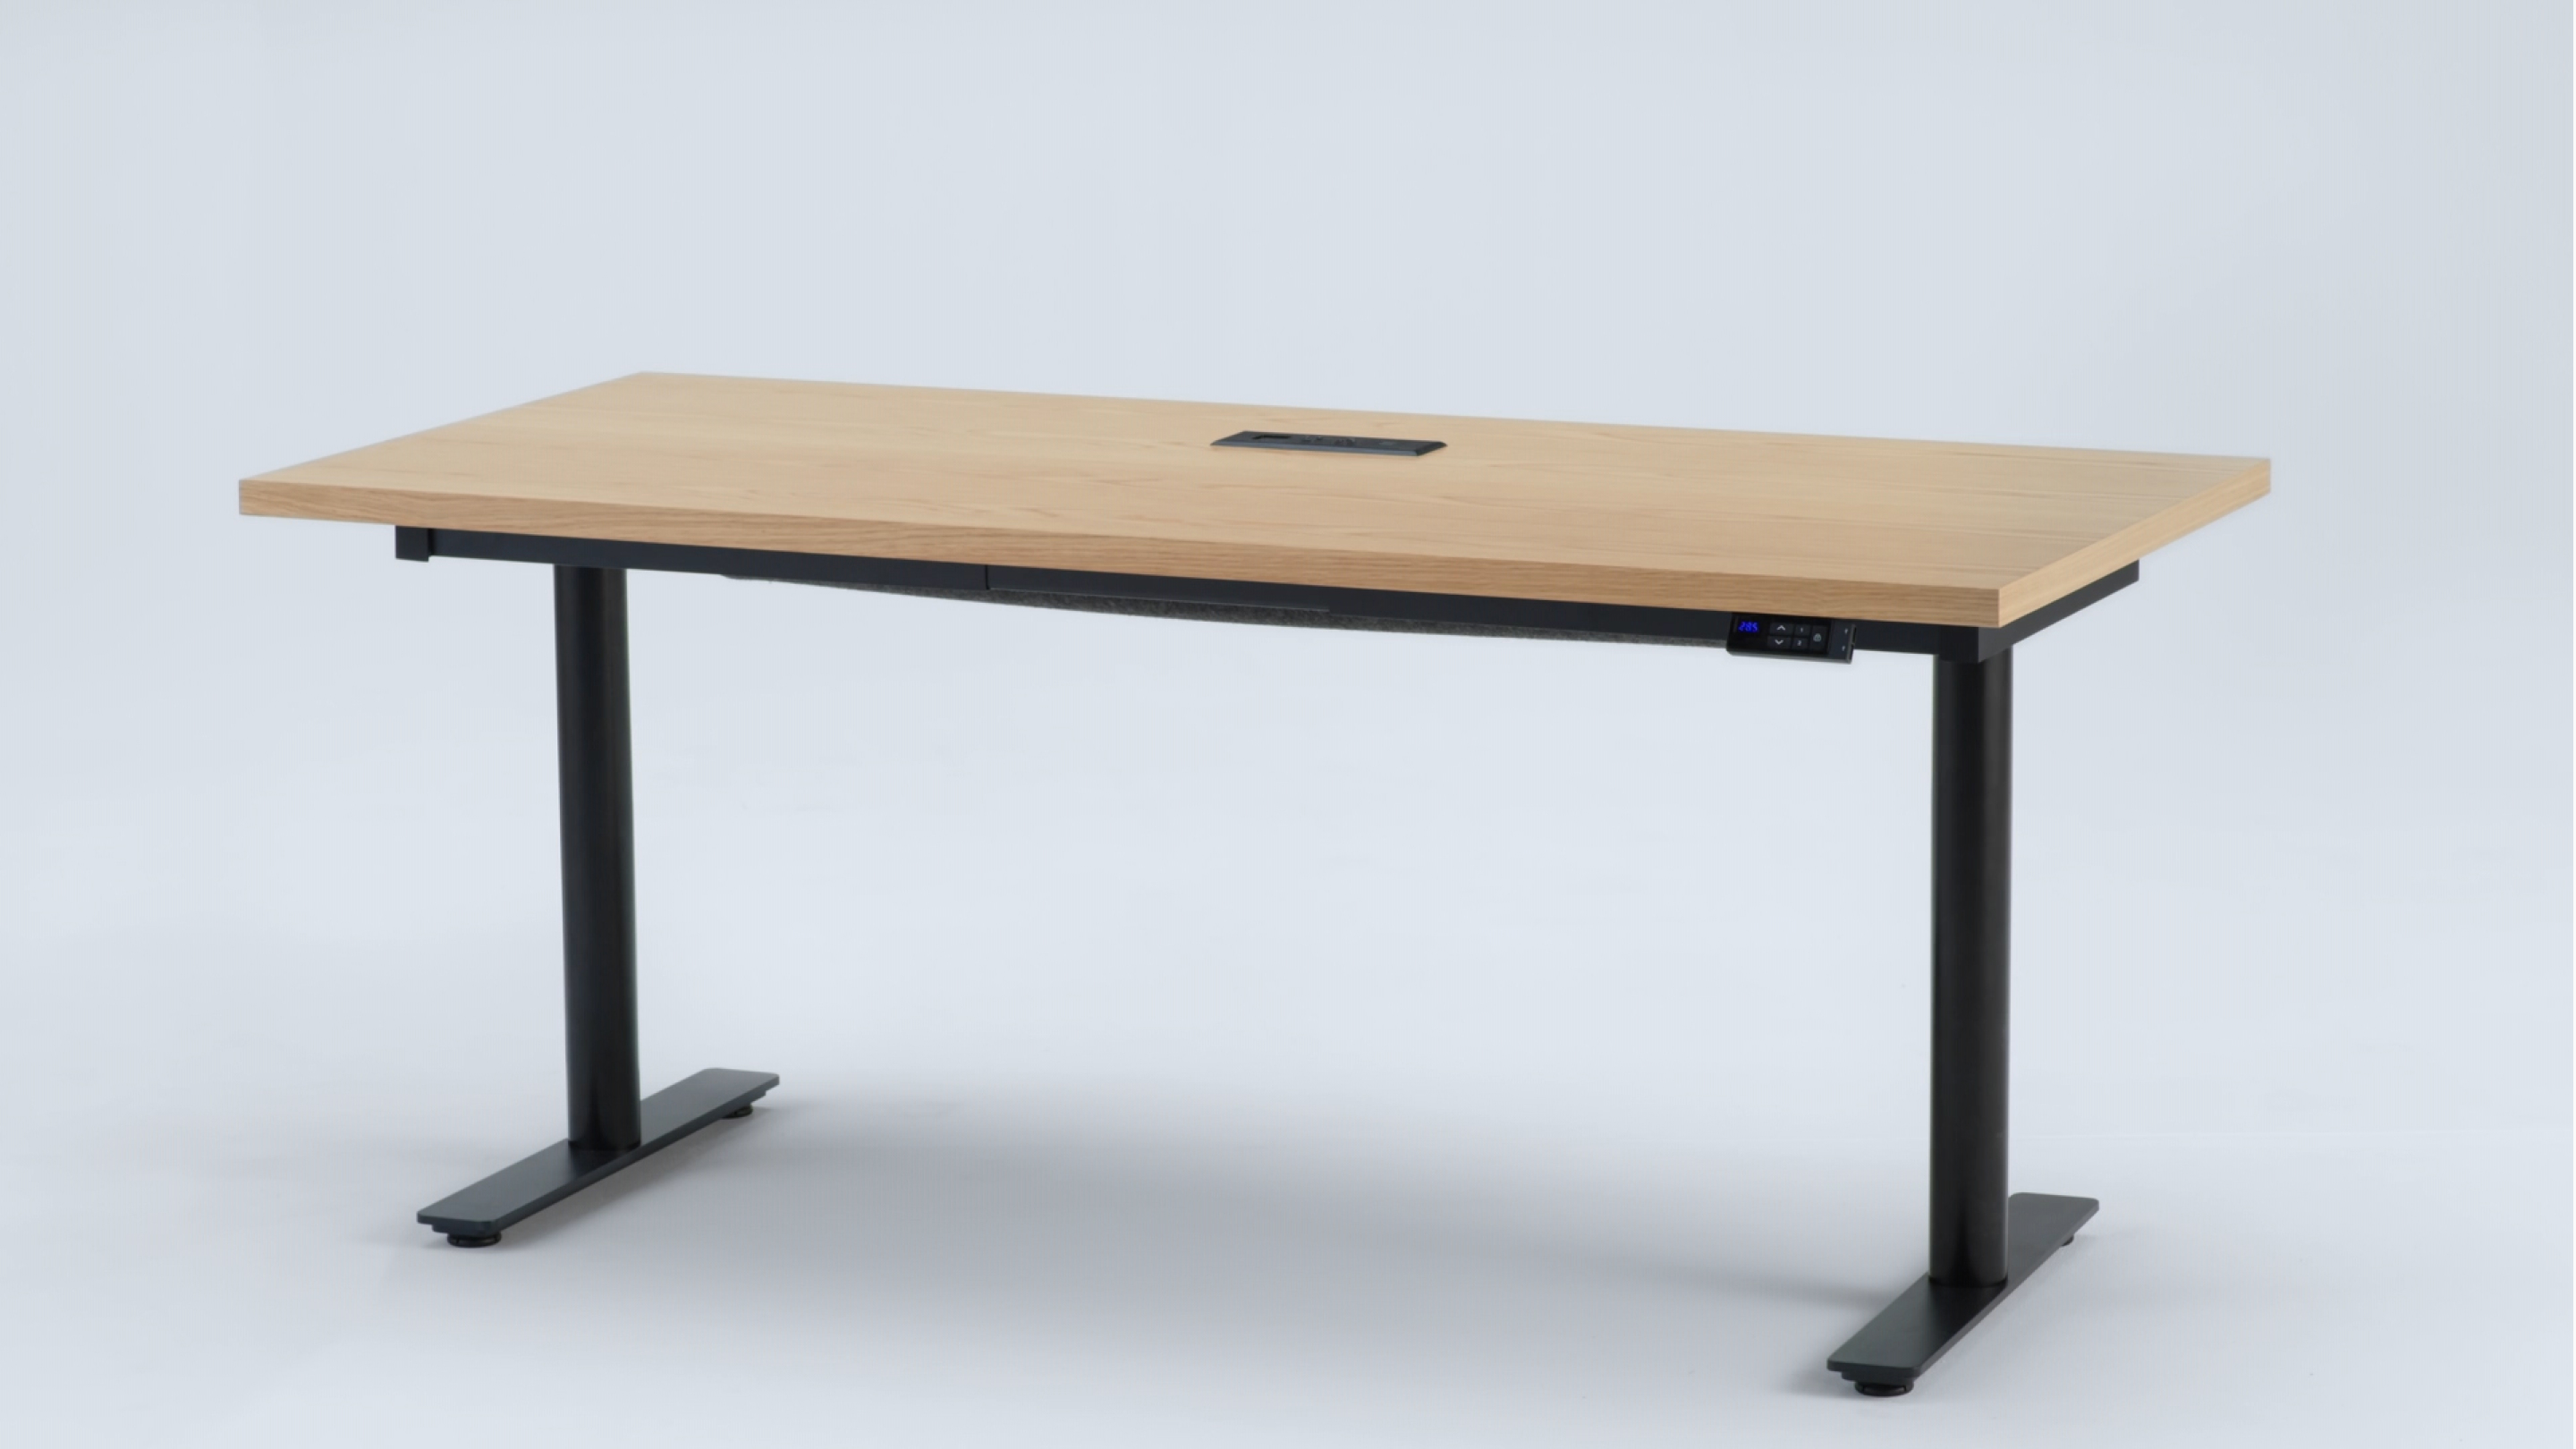 Geiger One Height-Adjustable Stand-Alone Desk video in loop.